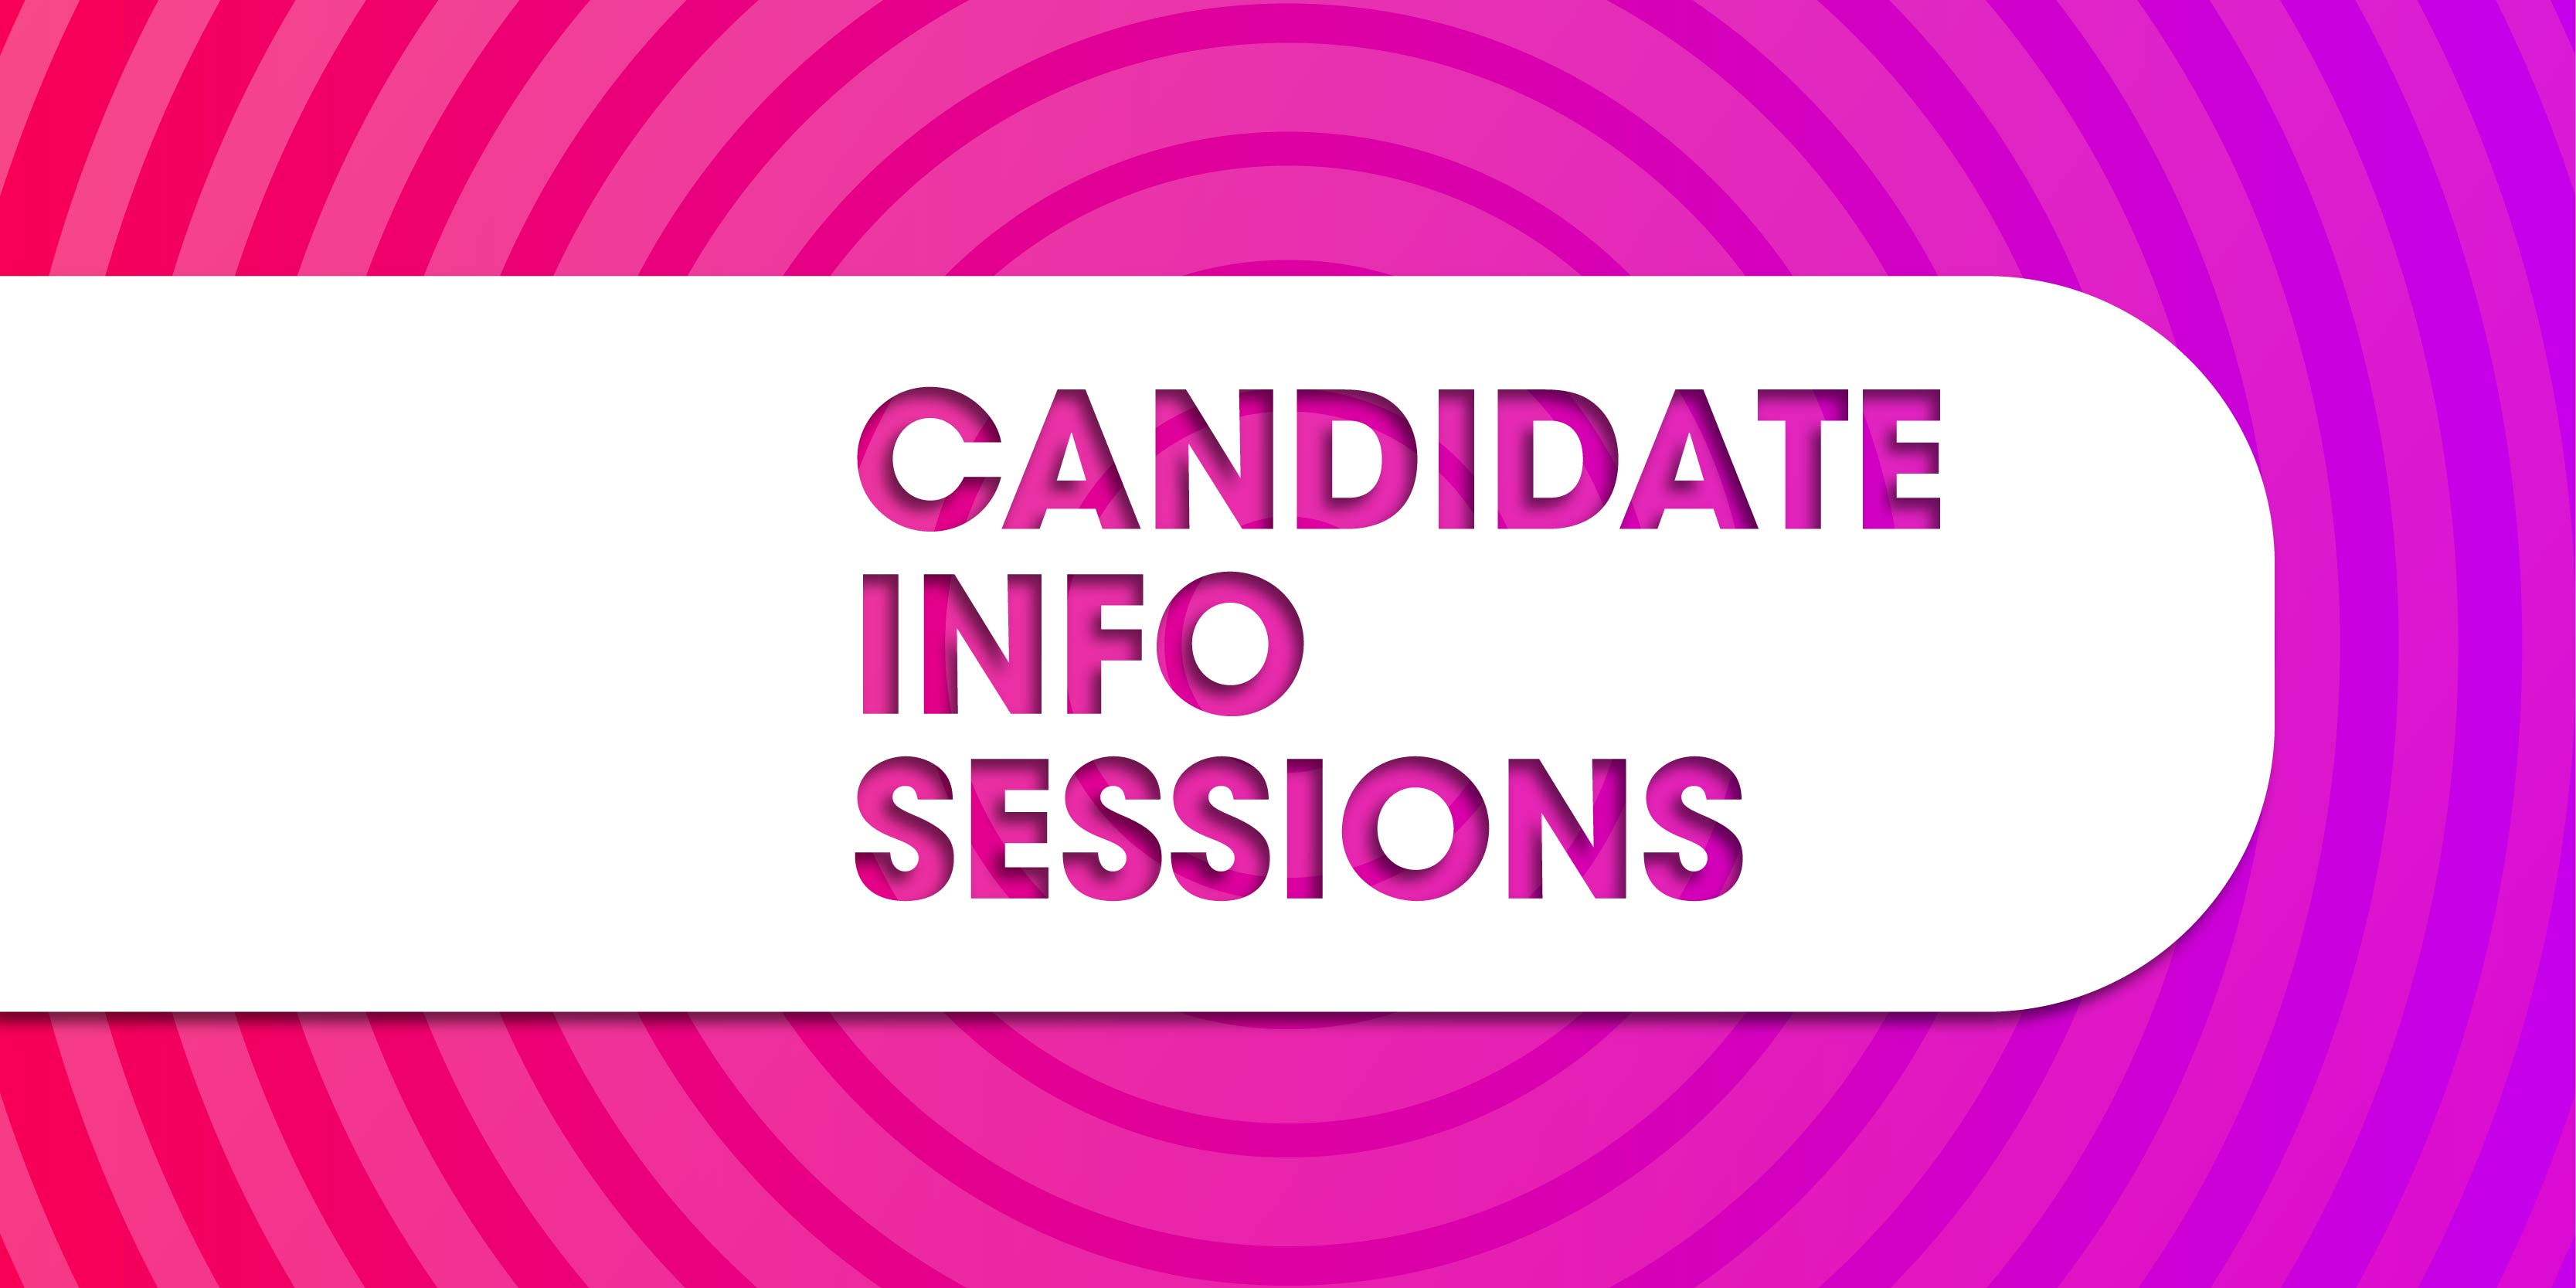 Candidate Info Sessions